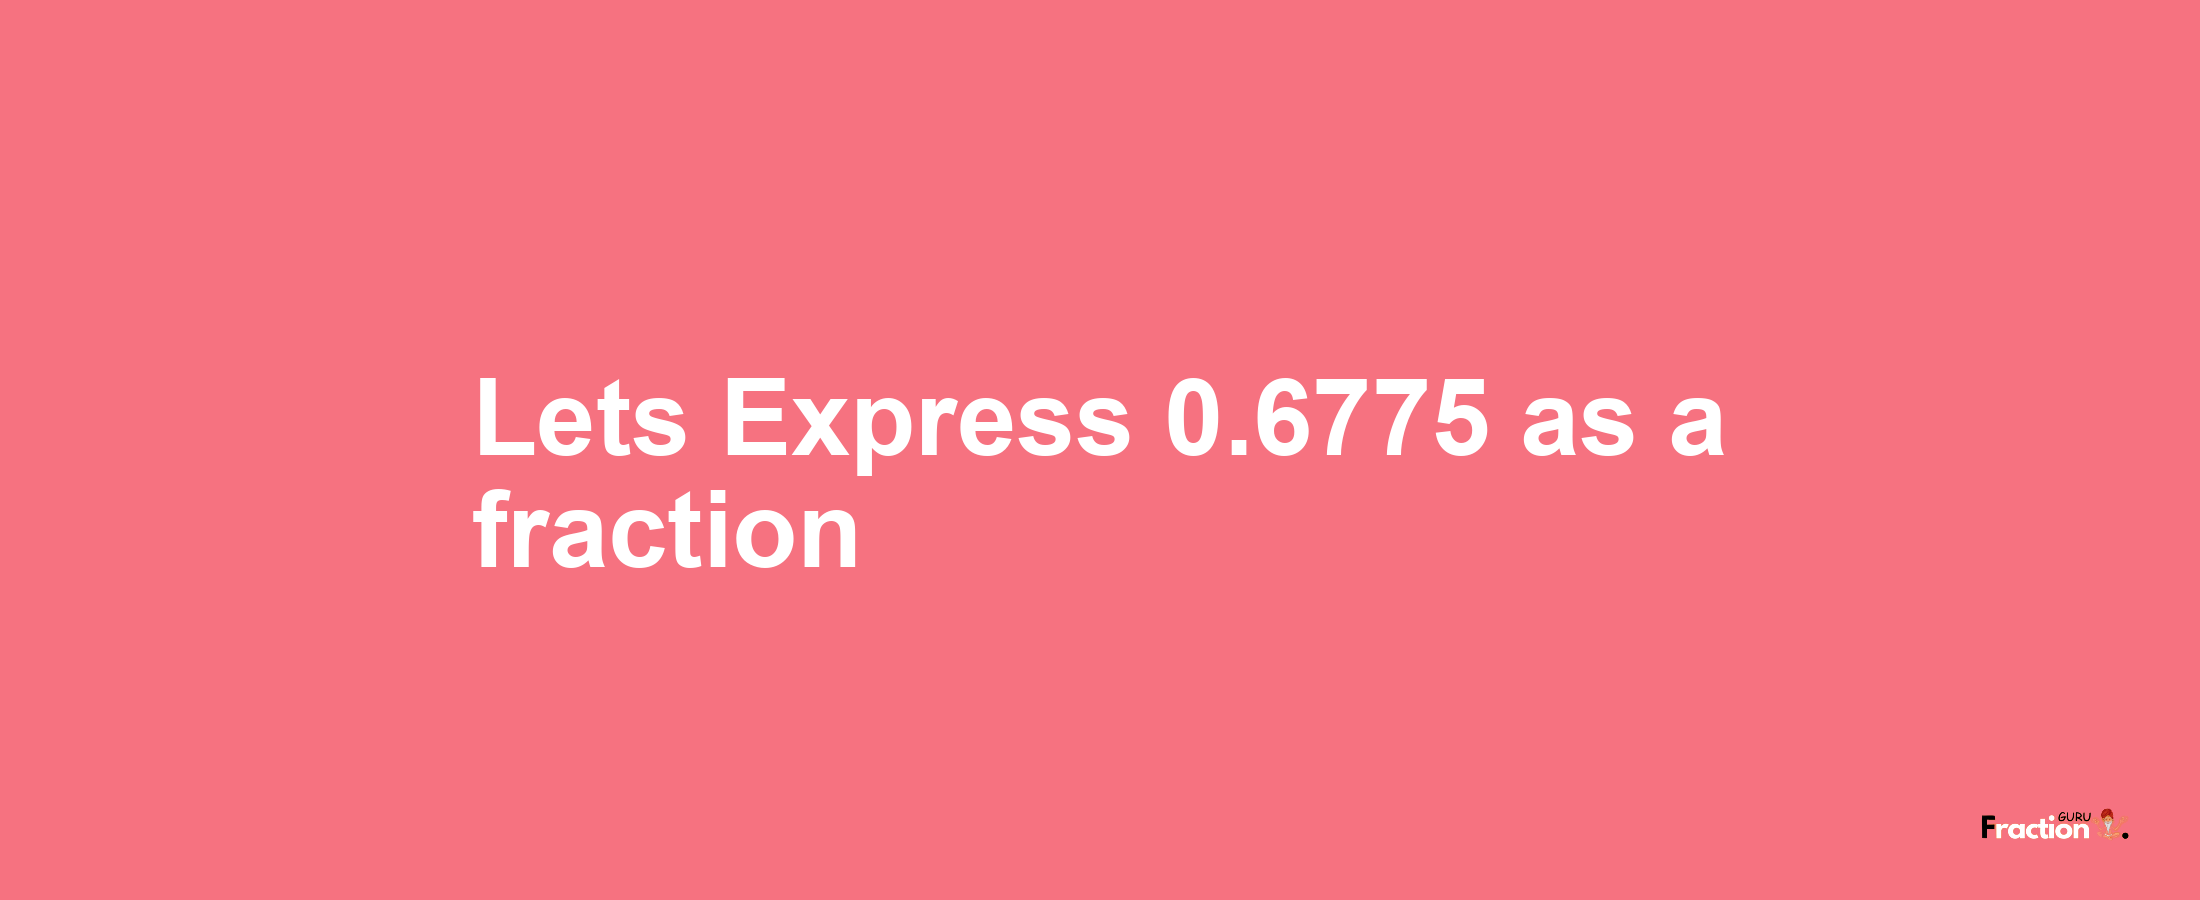 Lets Express 0.6775 as afraction